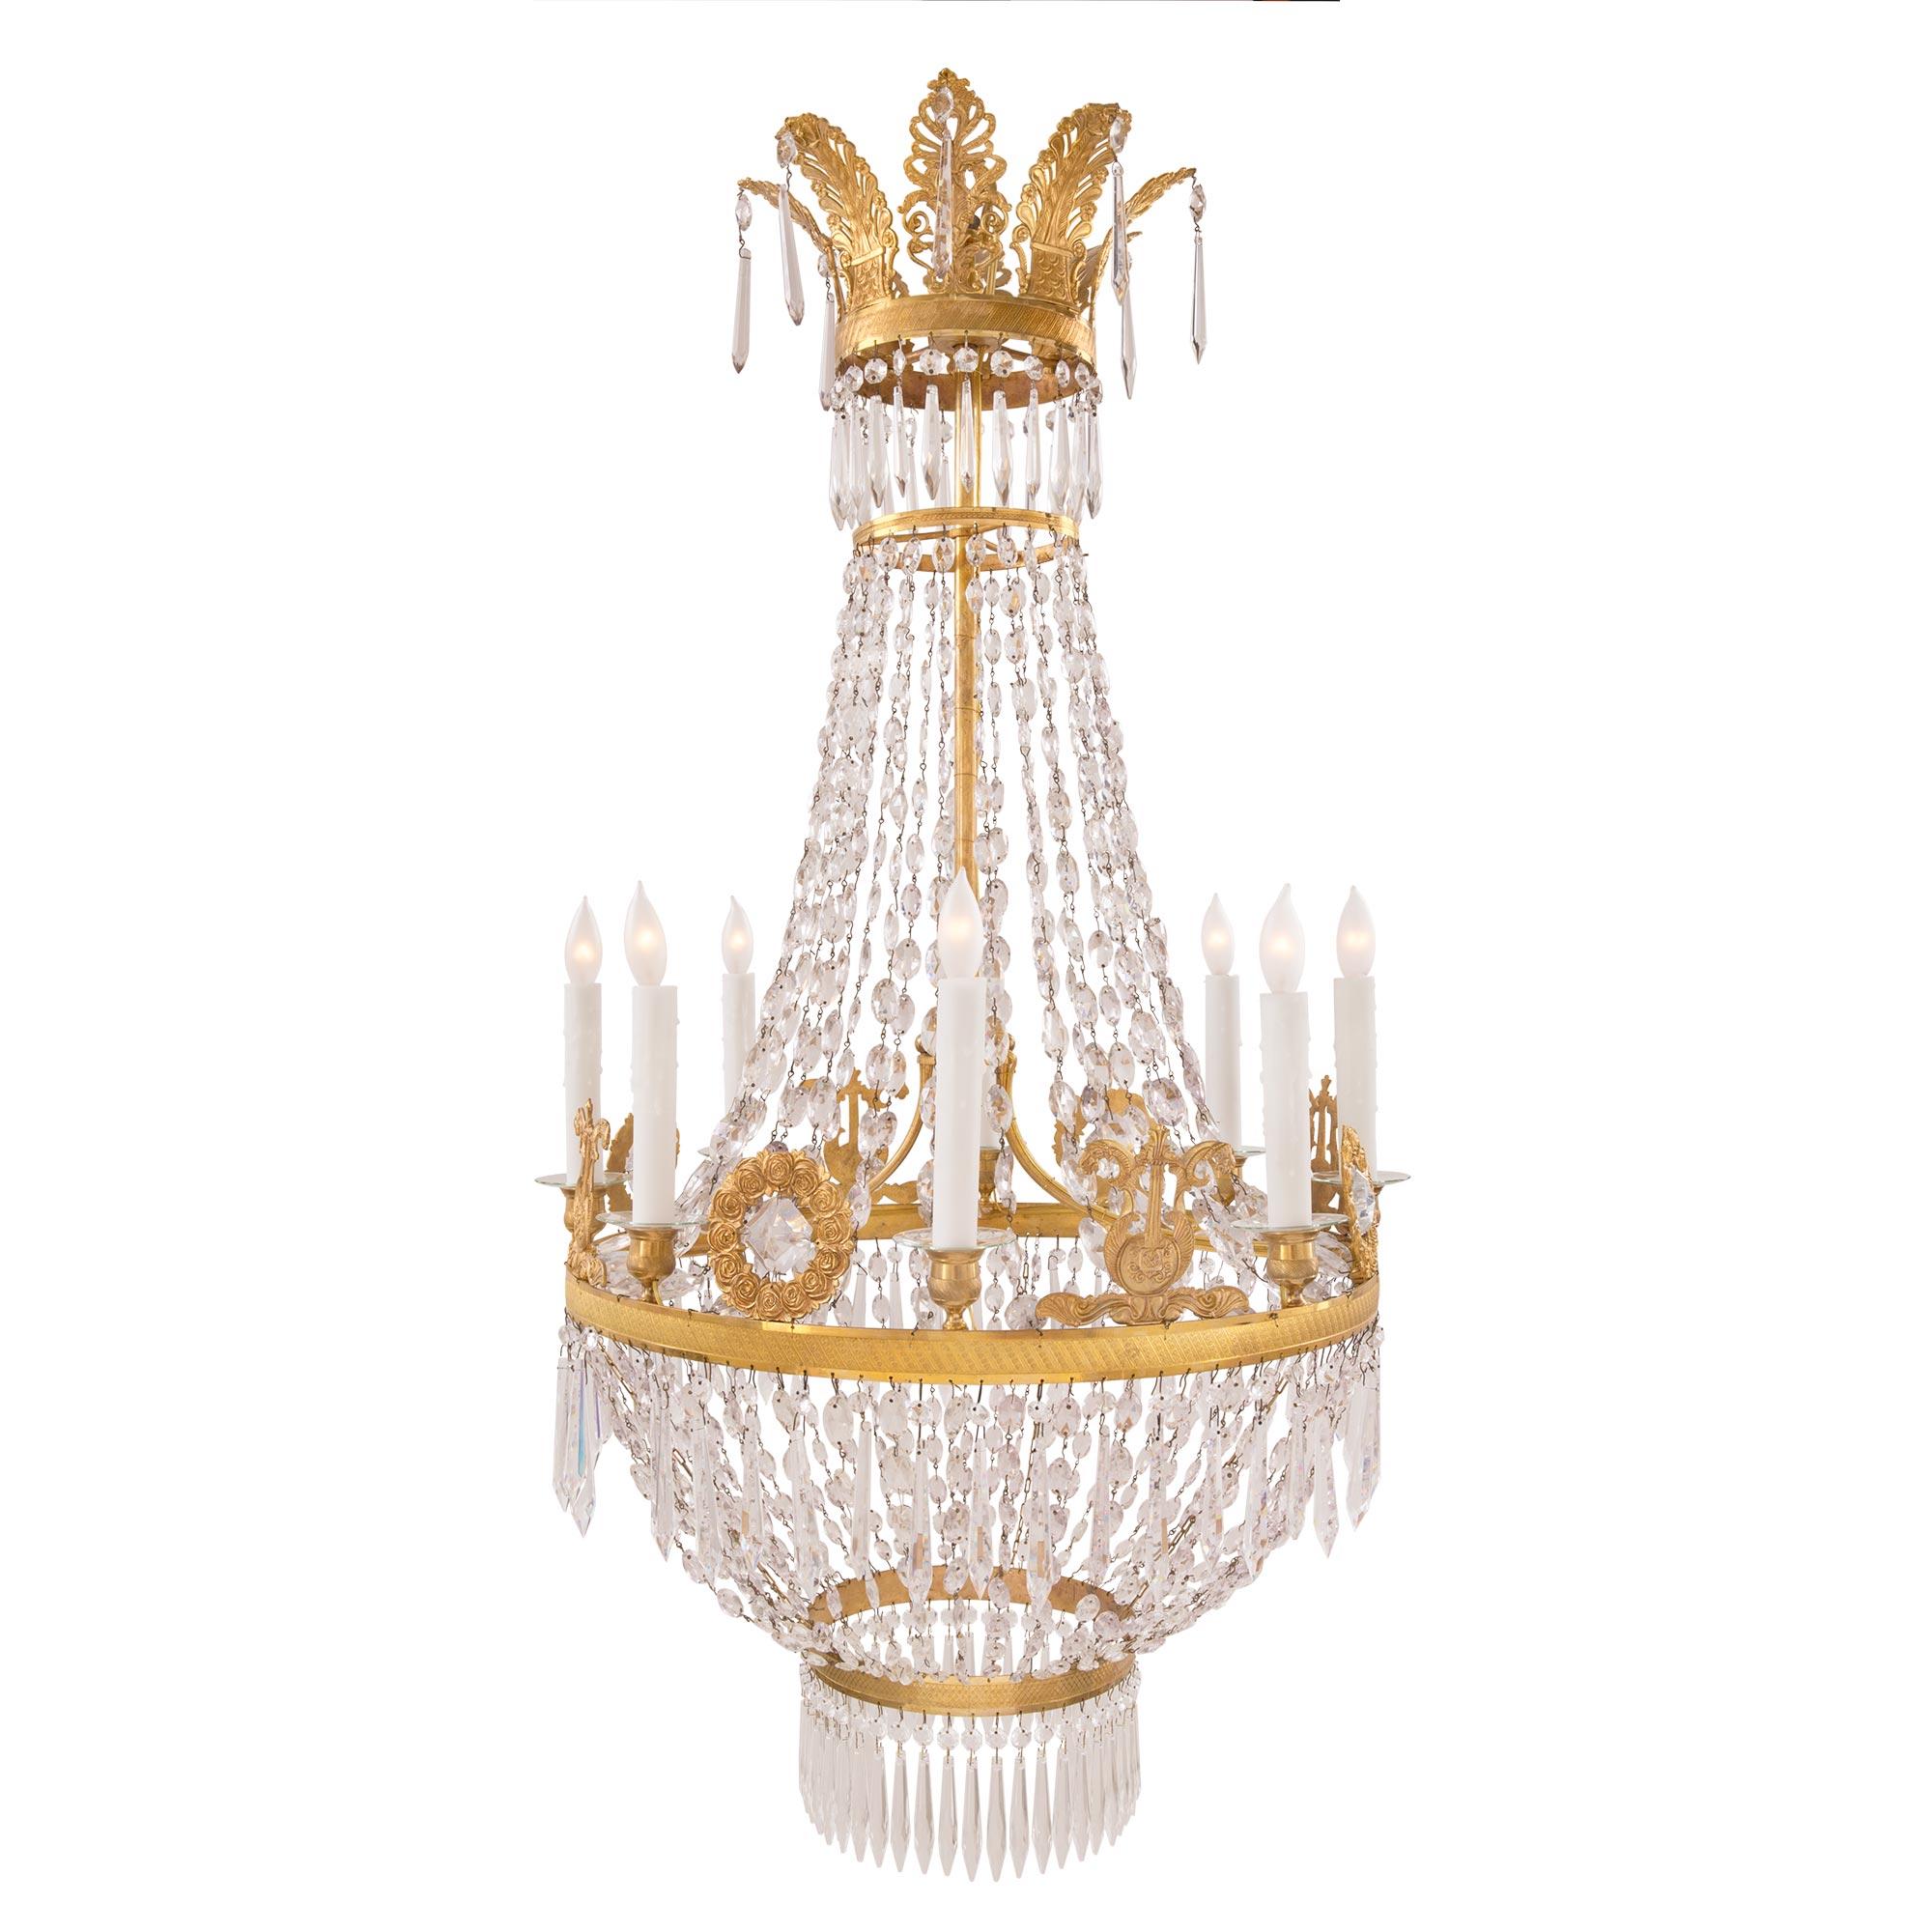 An exquisite French 19th century Neo-Classical st. ormolu and Baccarat crystal eight-light chandelier. The chandelier is centered by a lovely circular array of prism-cut crystal pendants tied to a fine ormolu bottom tier with a charming lattice